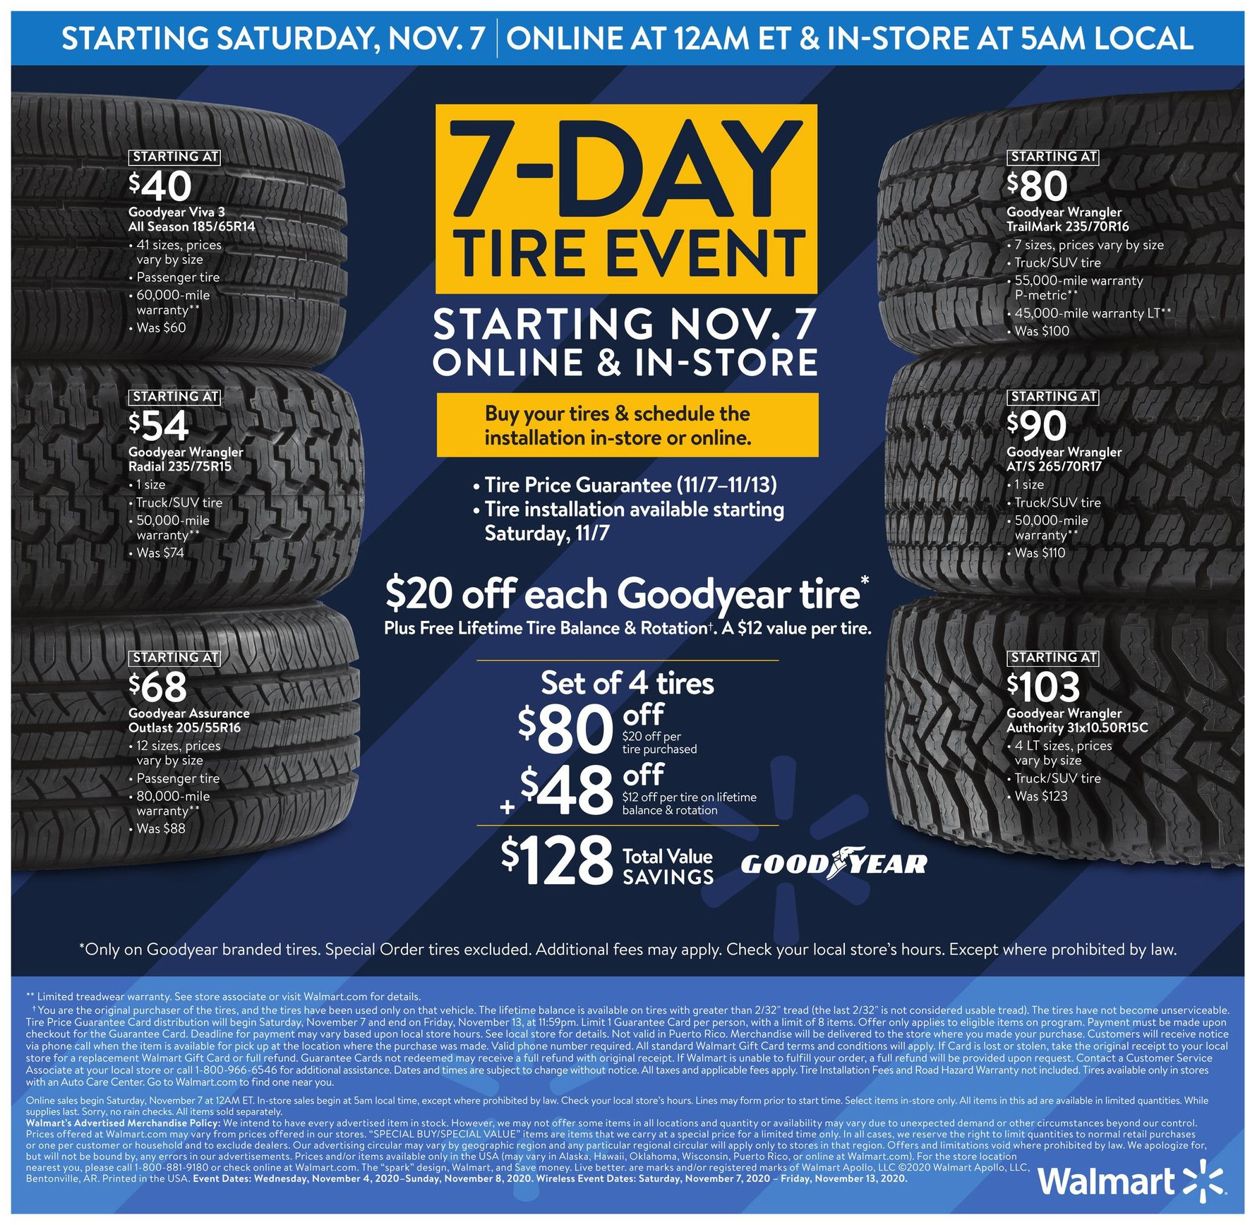 Walmart Tire Warranty Explained 2022 (What's Covered + Price)